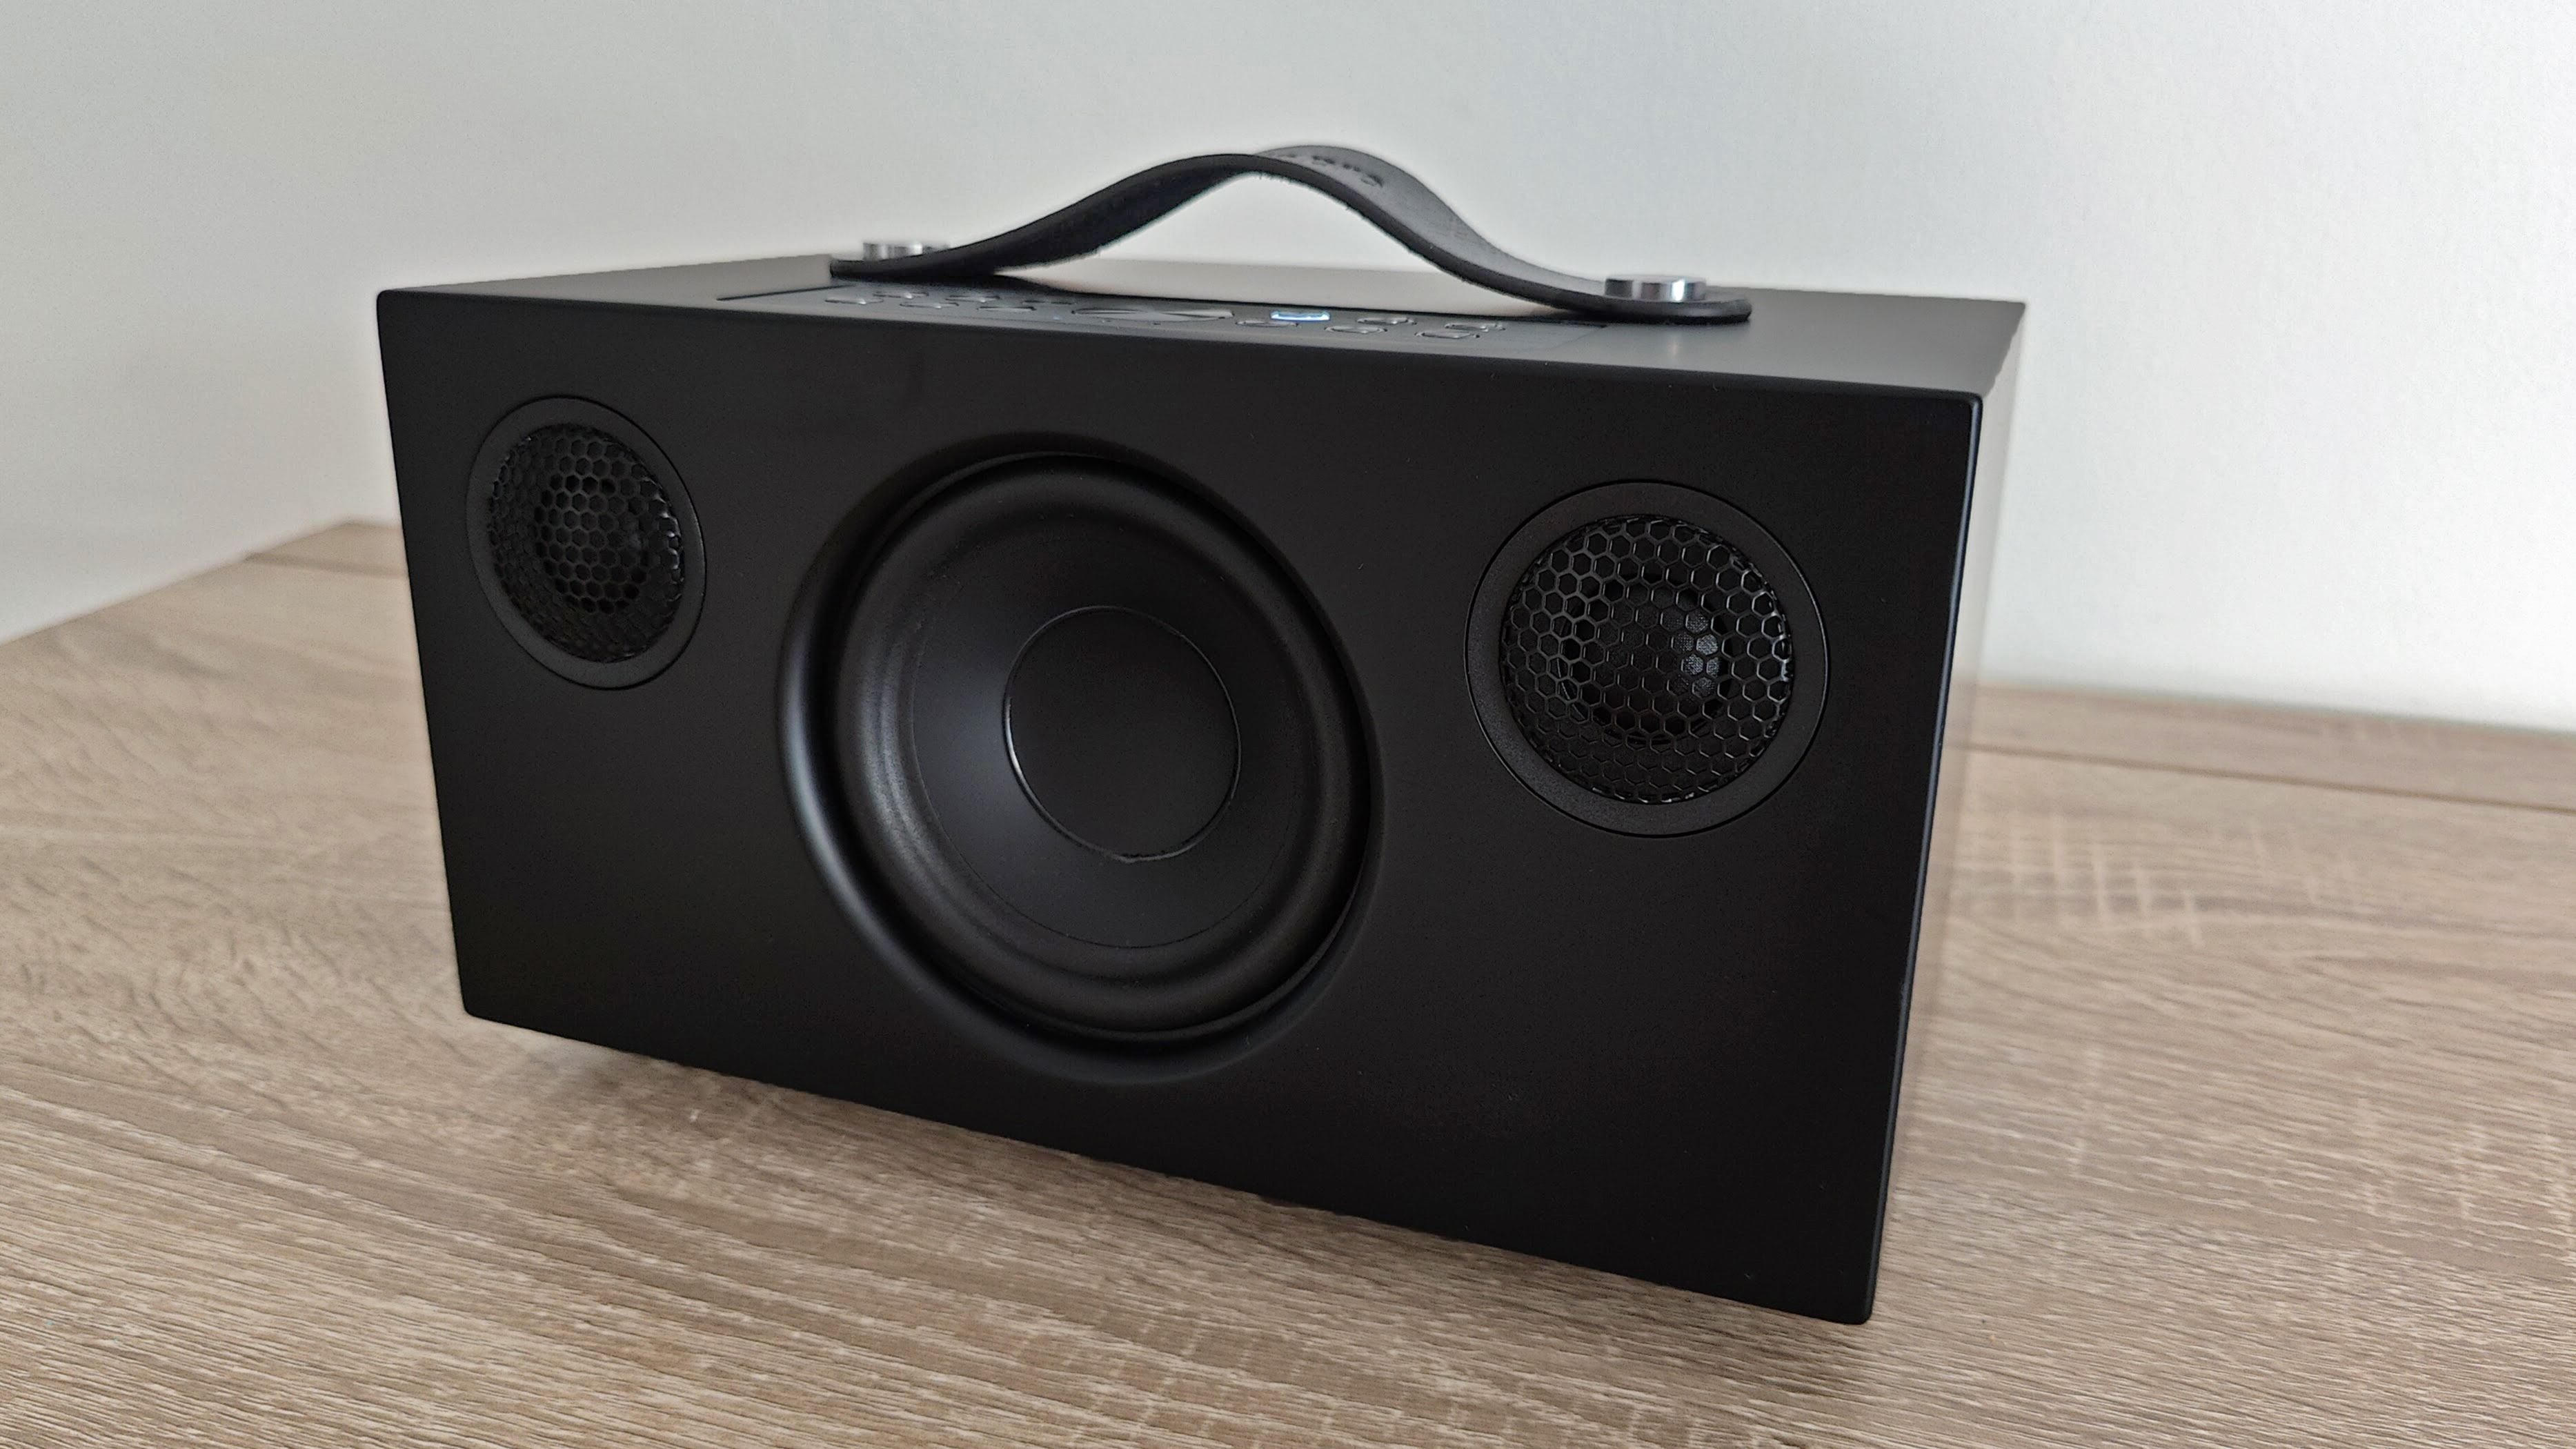 Hilse biografi træ Audio Pro C5 Mk II review: stylish with serious sound | T3